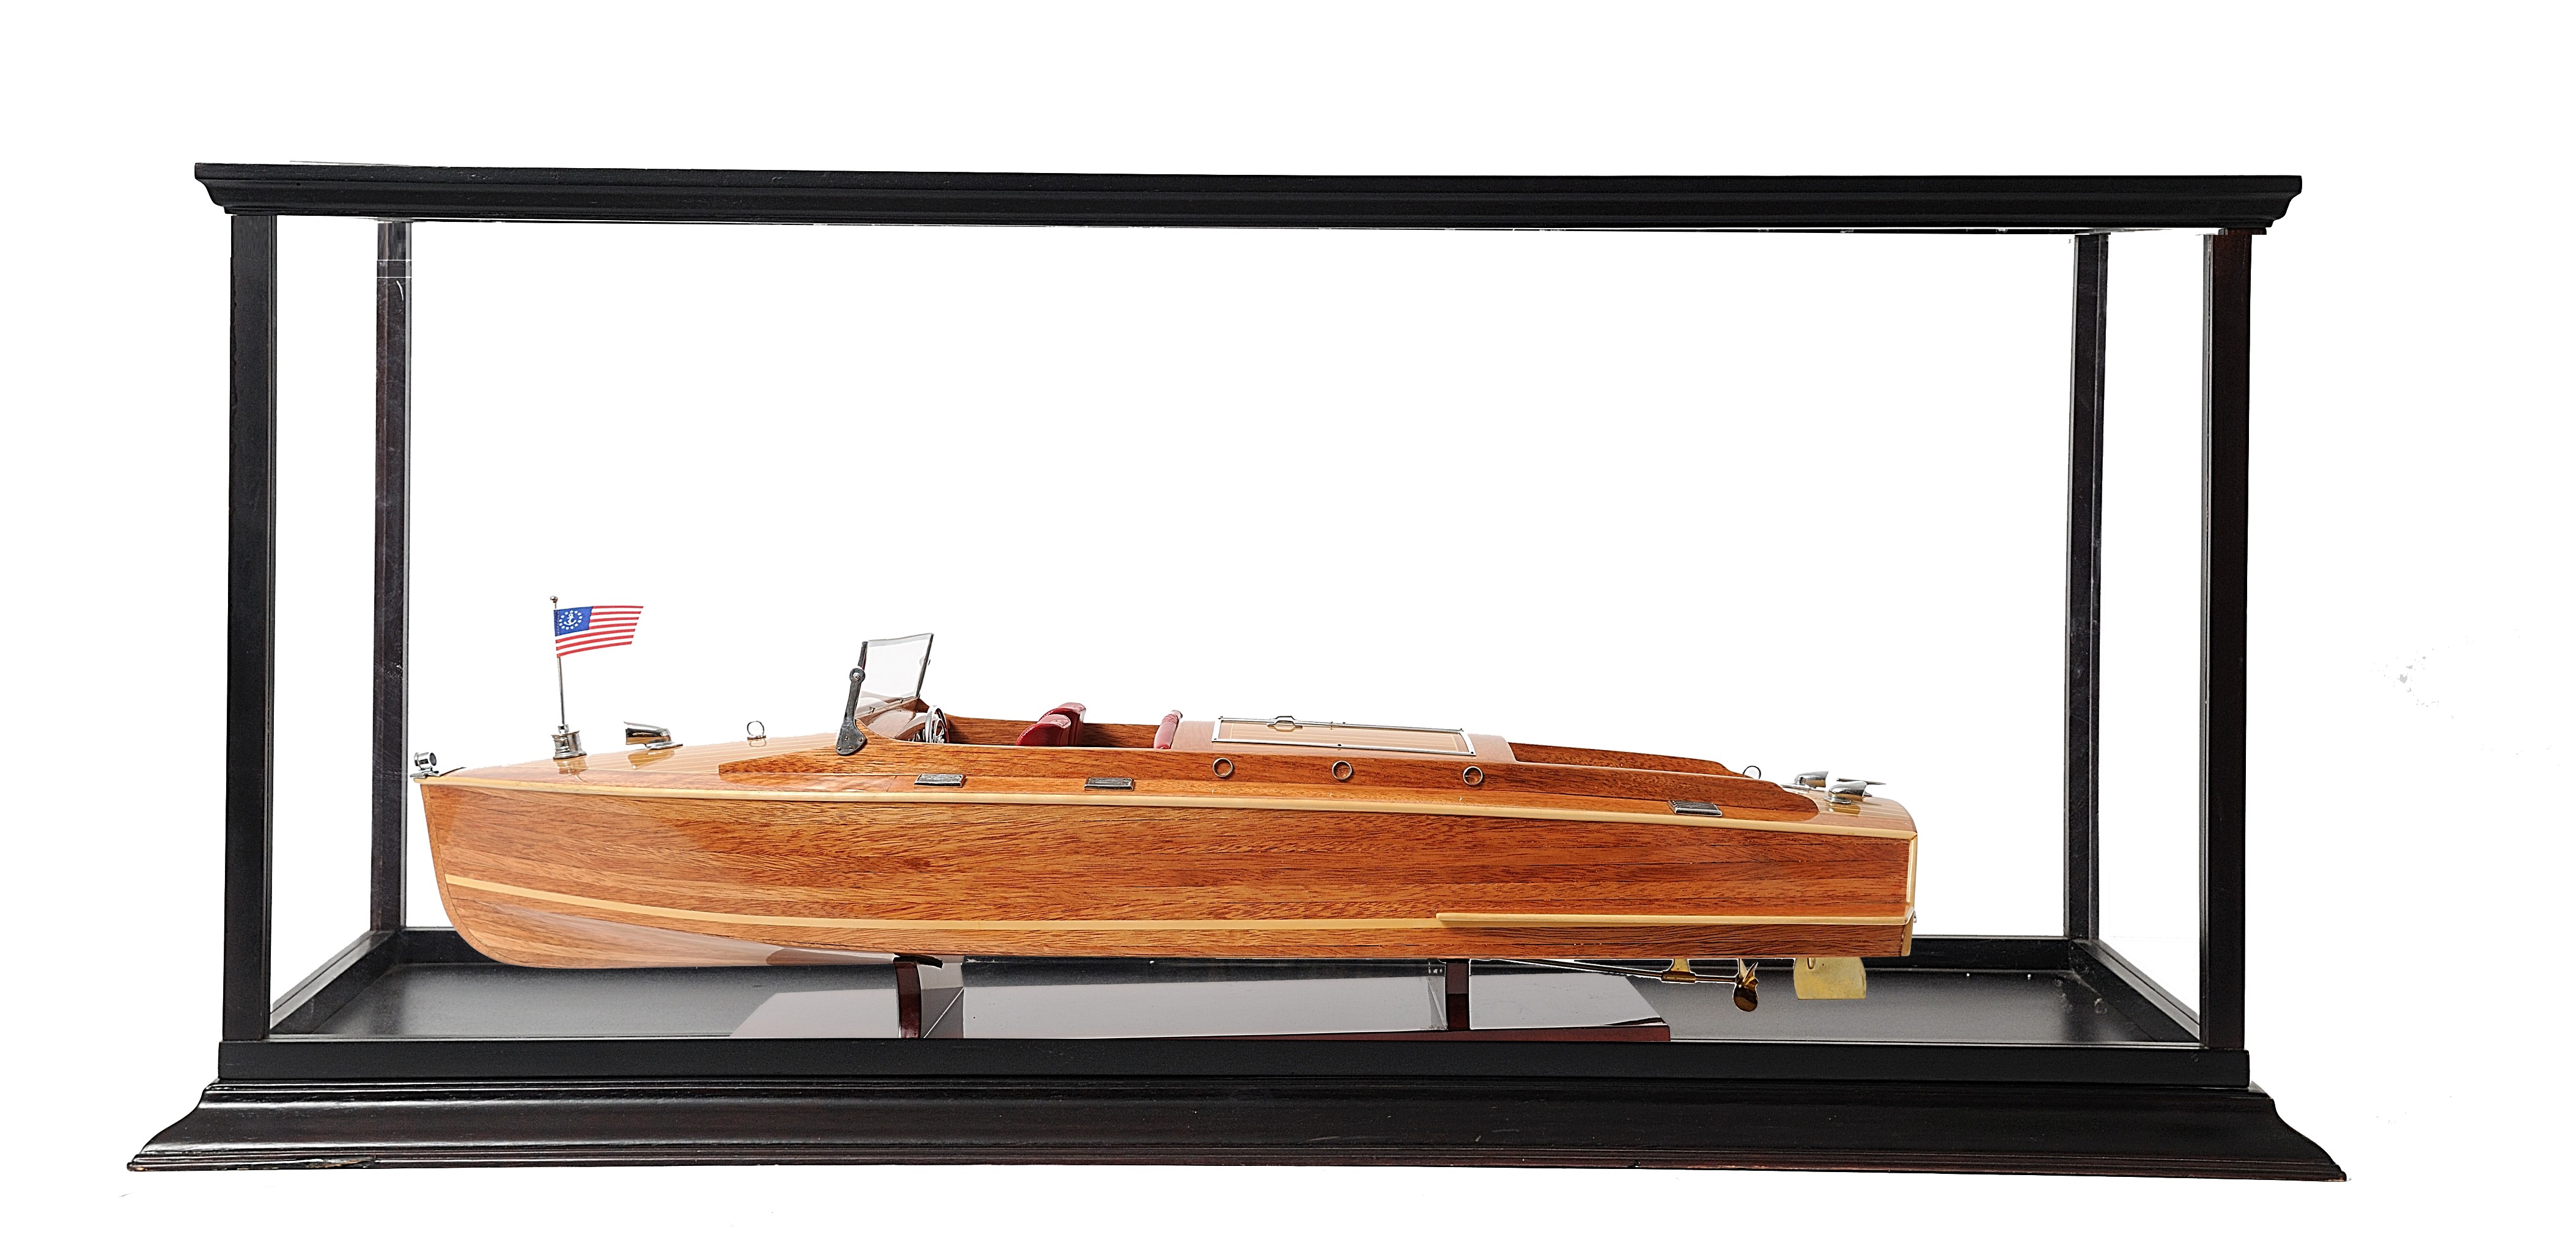 B033A Chris Craft Runabout with Display Case b033a-chris-craft-runabout-with-display-case-l01.jpg